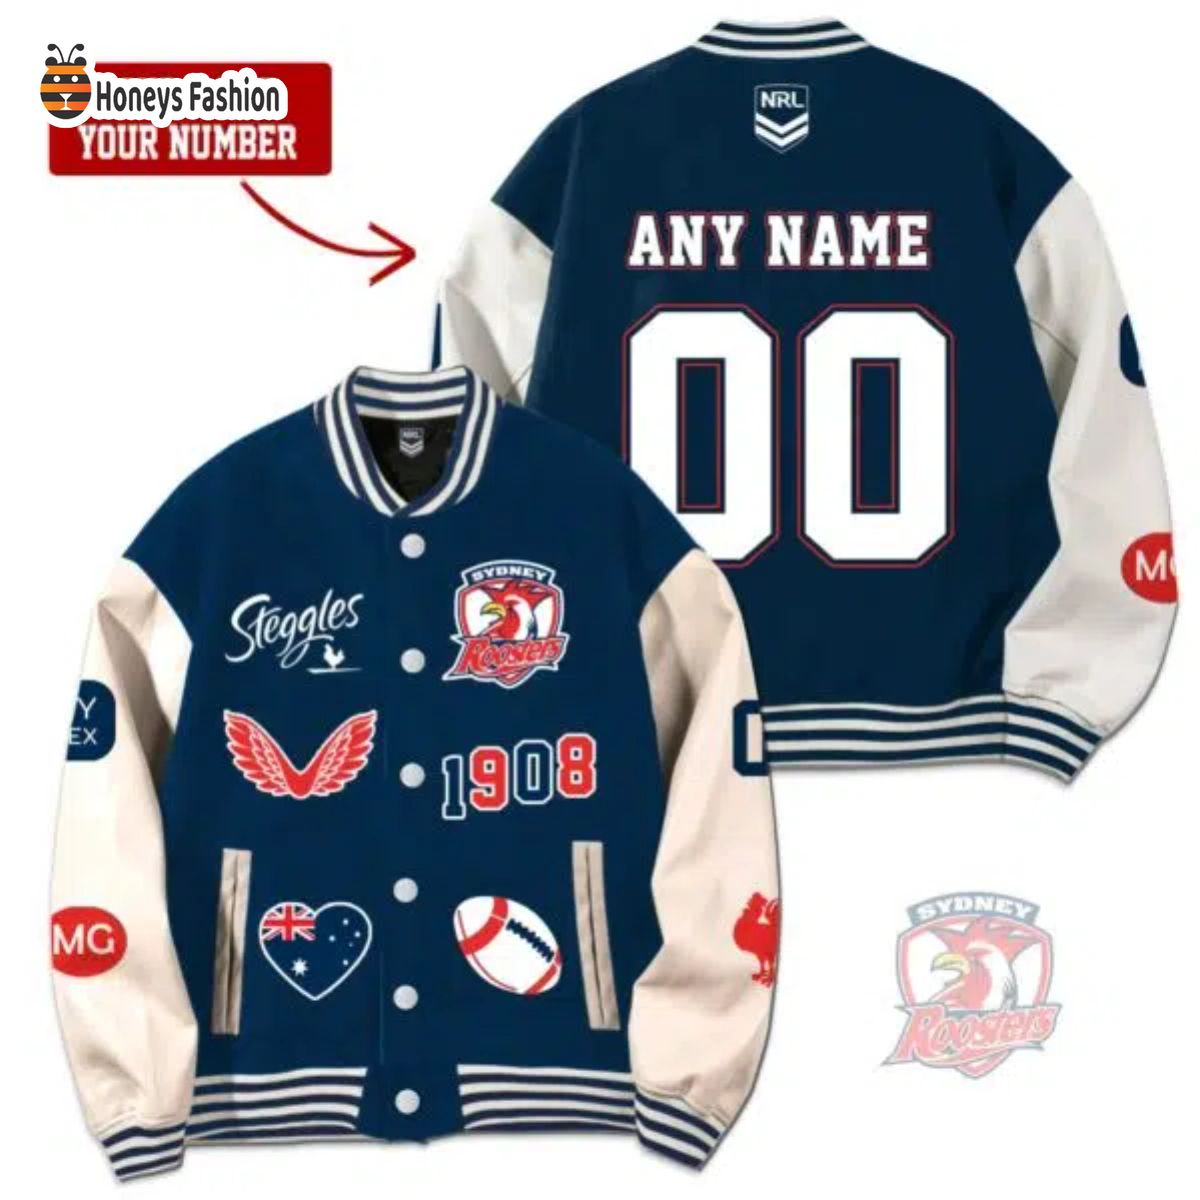 Sydney Roosters Custom Name Rugby Baseball Jacket